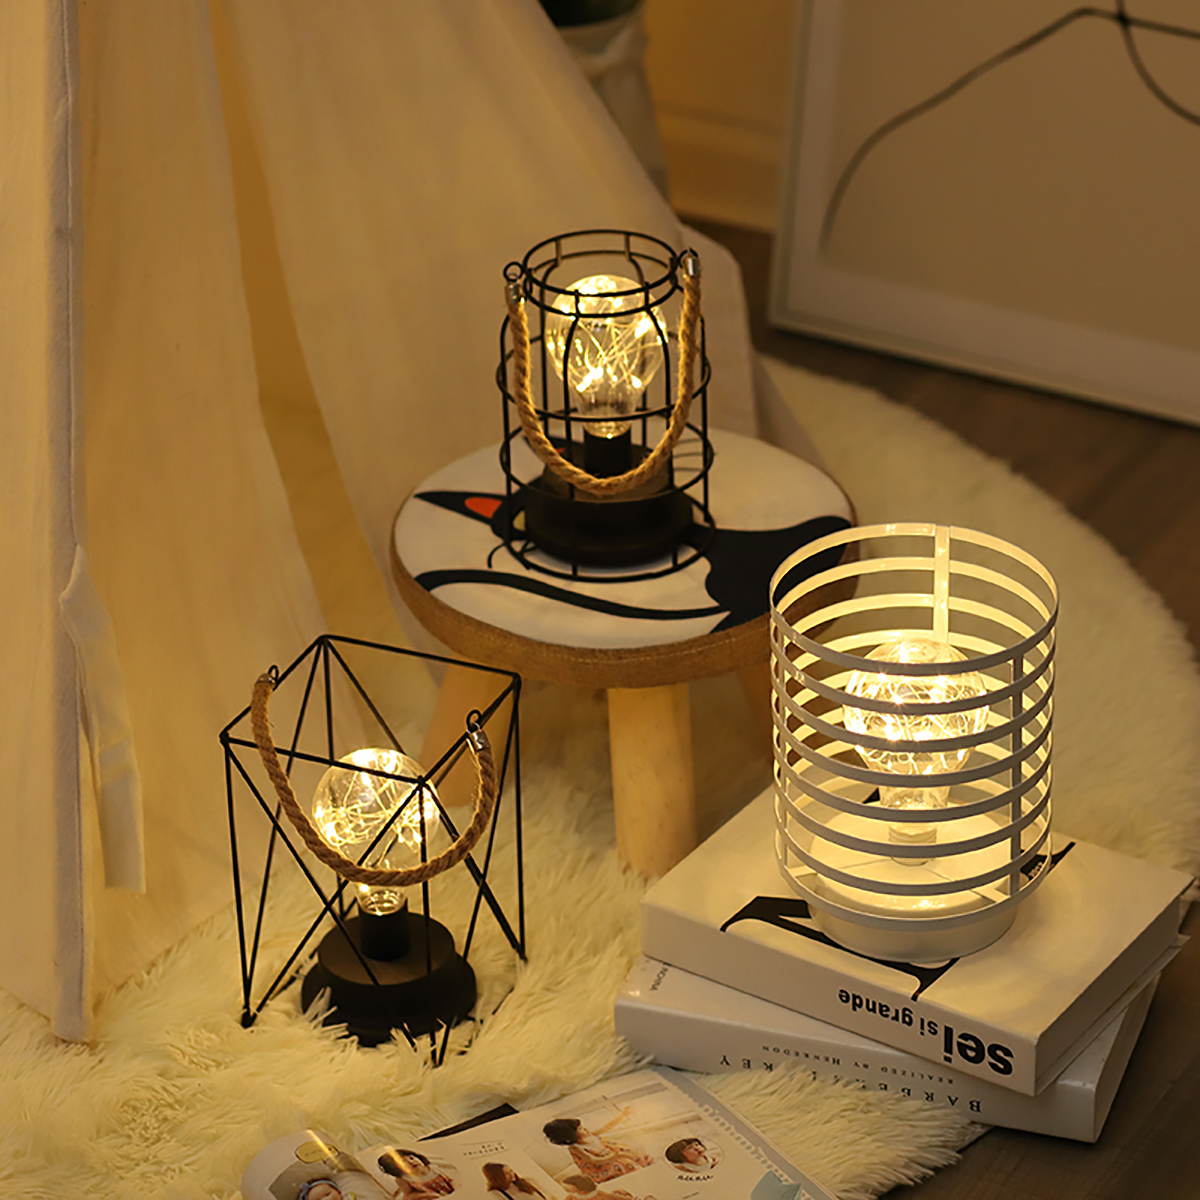 Retro-Cage-Light-Mini-Metal-Battery-Powered-LED-Bulb-Lamp-for-Living-Room-Bedroom-Kitchen-Wedding-Ch-1733946-7